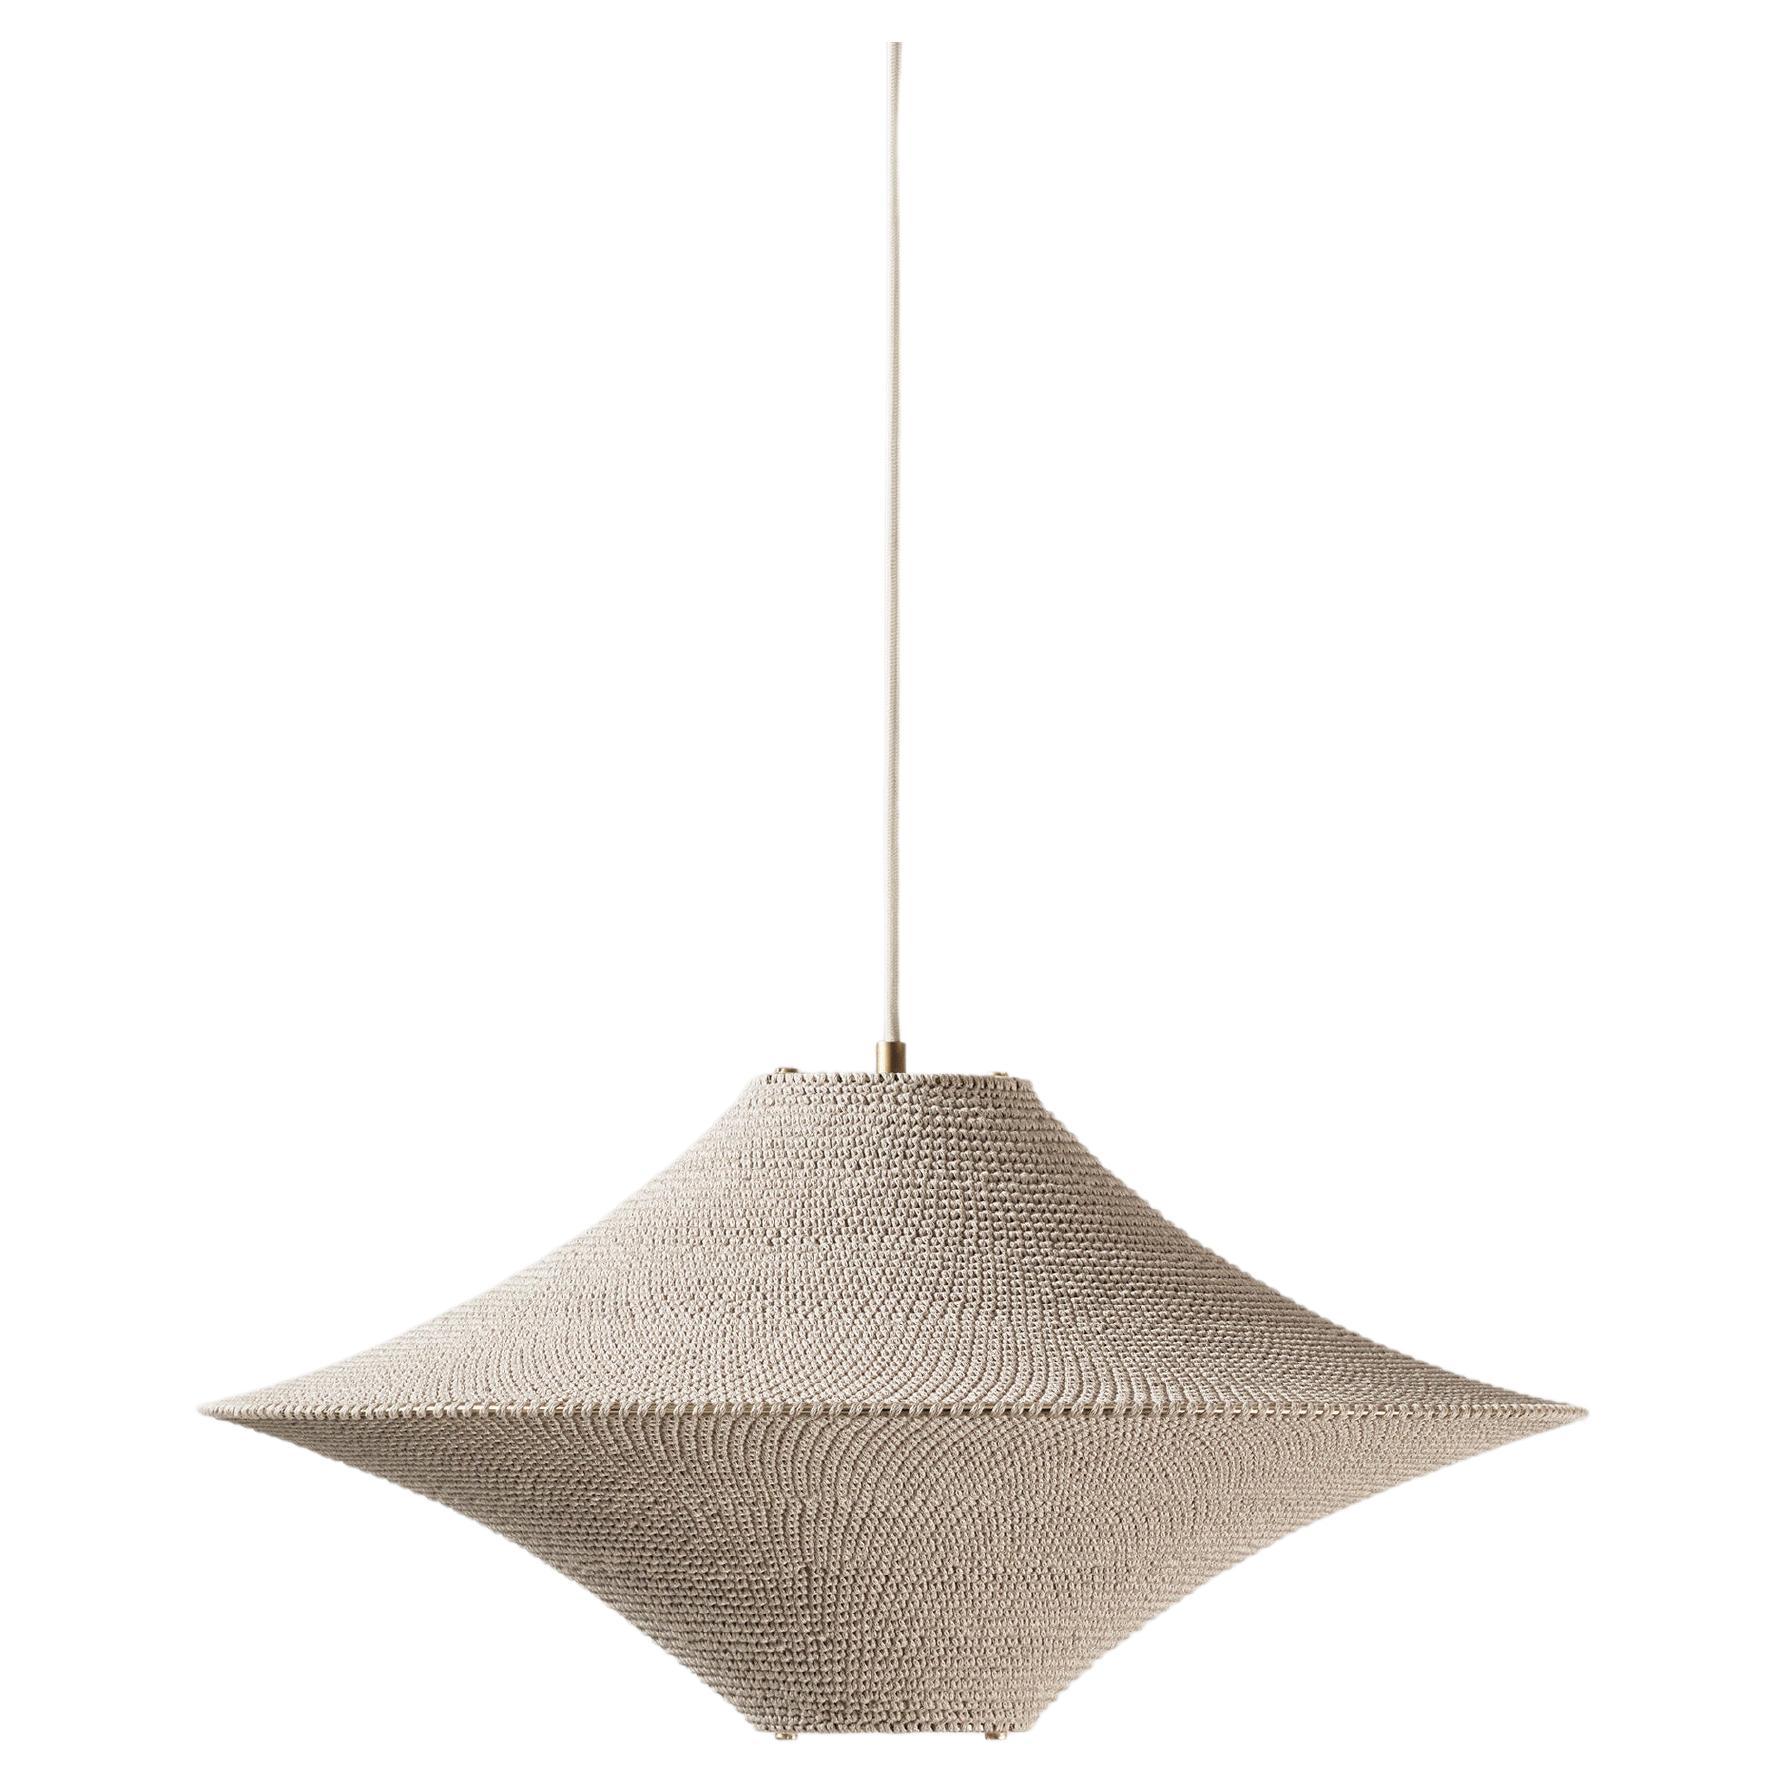 BAMBOO SOLITAIRE 01 Pendant Light Ø50cm/19.7in, Hand Crocheted in Bamboo Paper